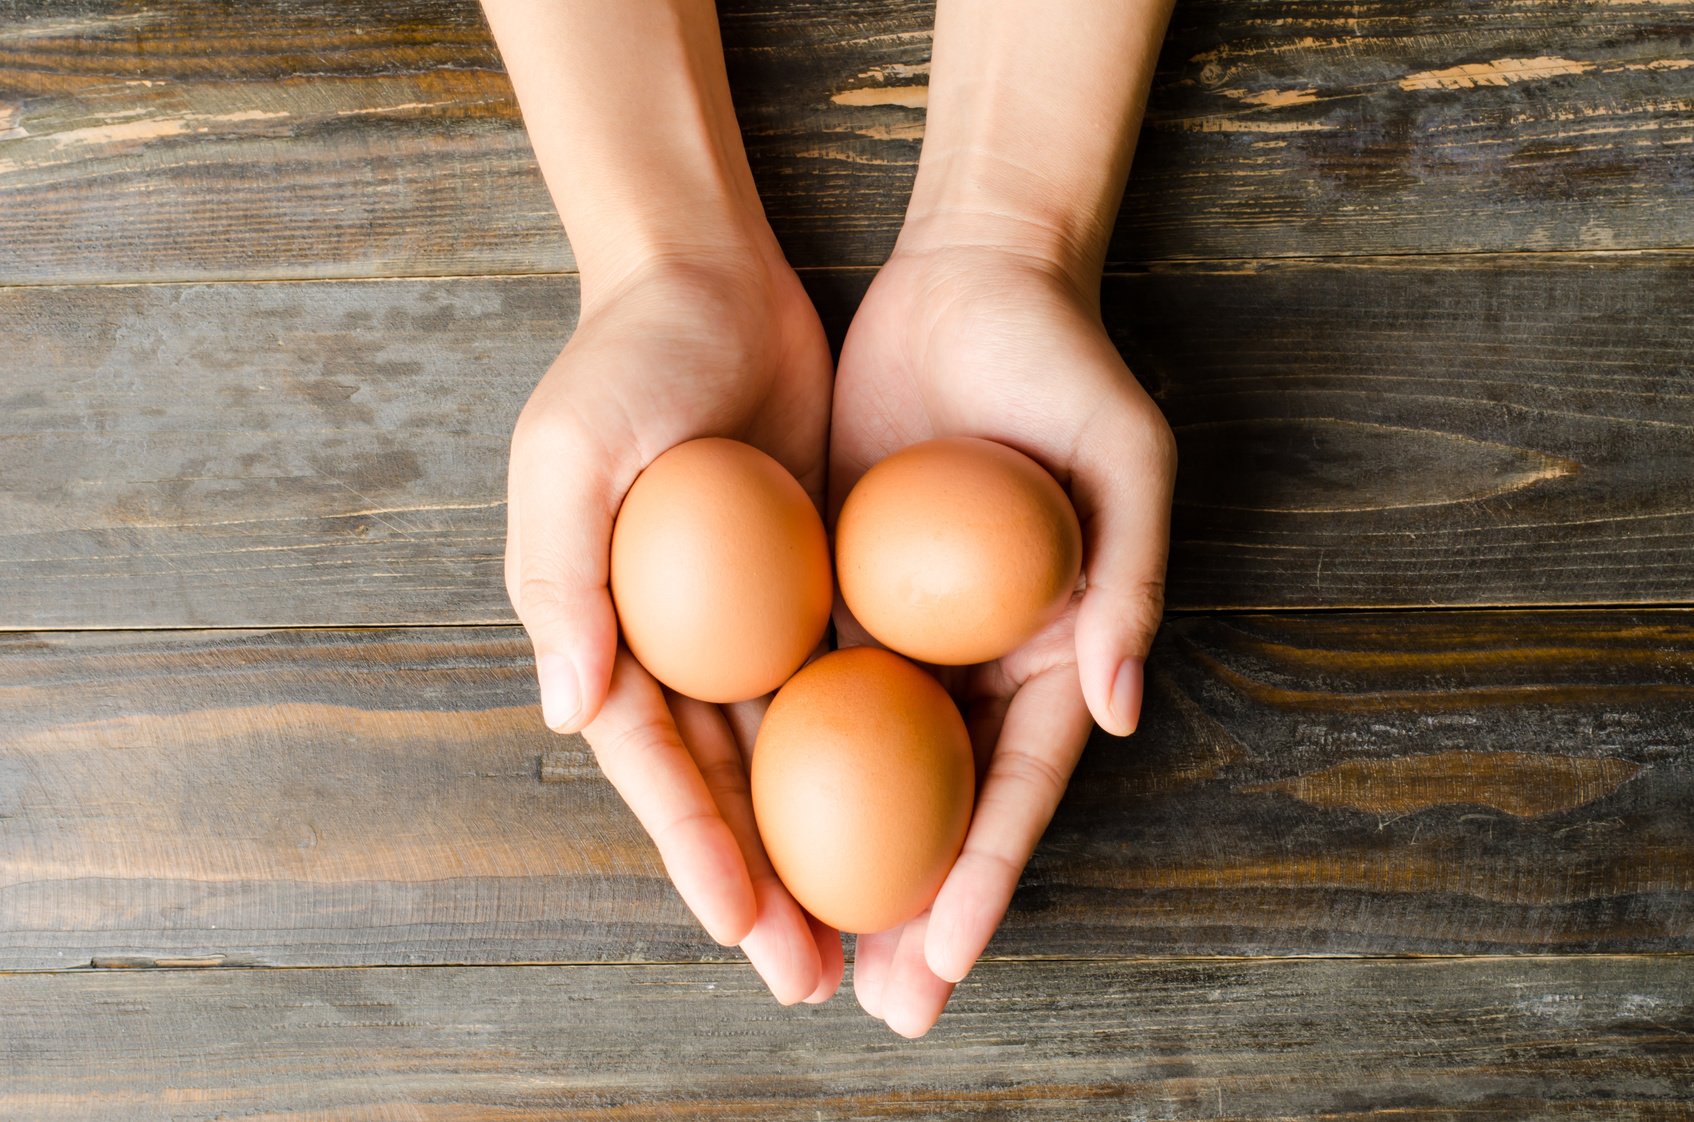 Fresh eggs are holding by hand on wooden background (food ingredient)